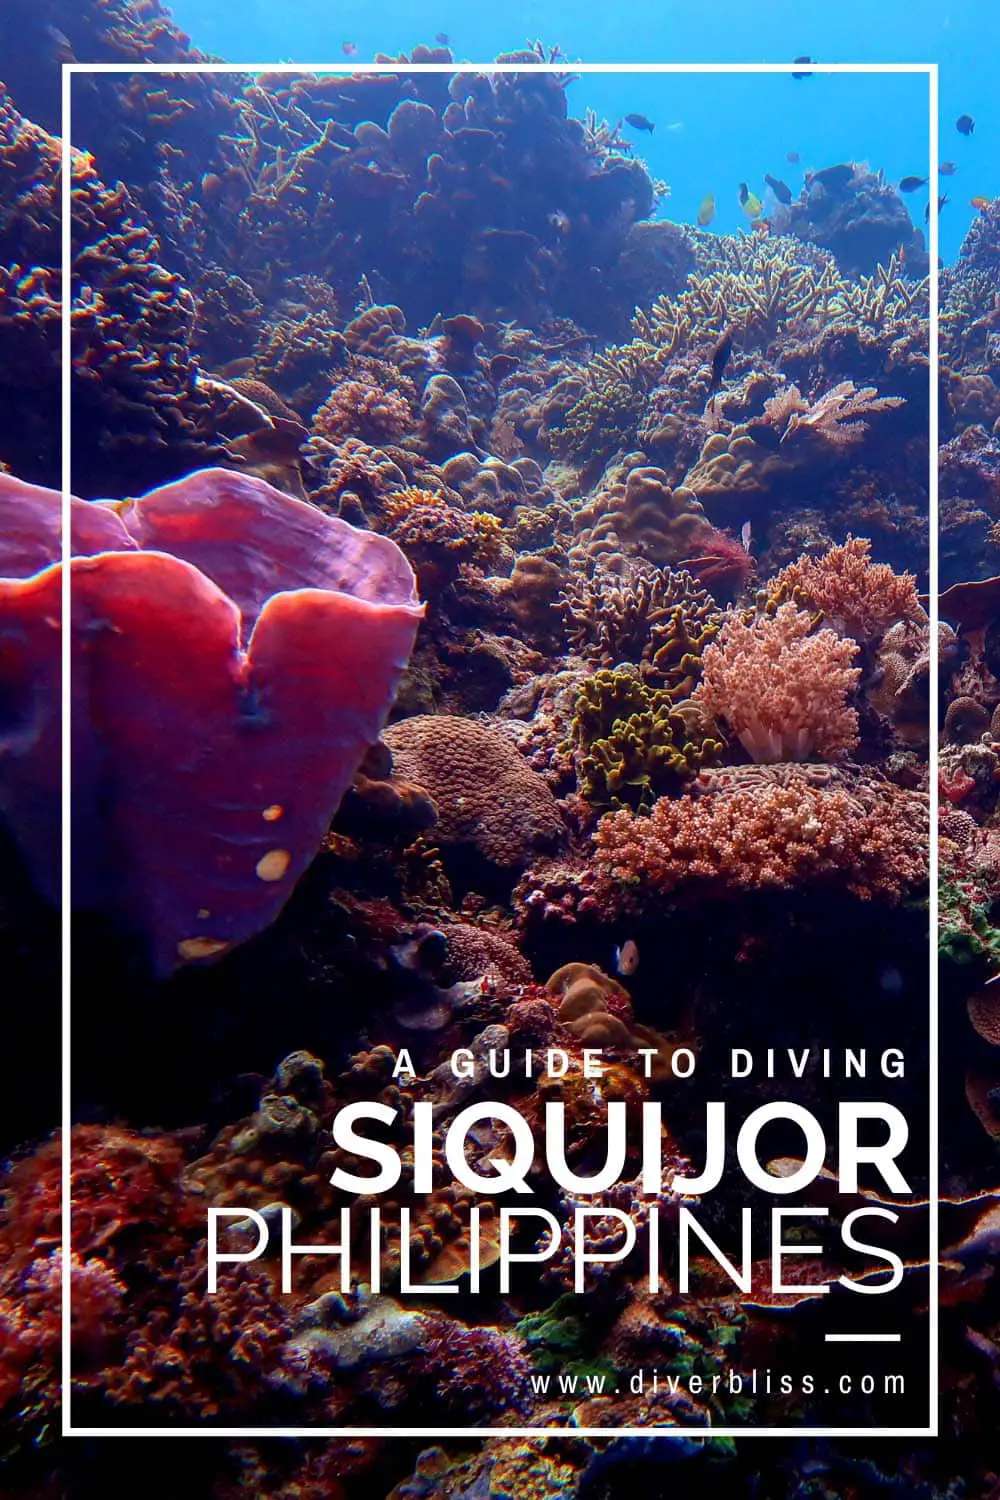 A guide to diving Siquijor Island Philippines